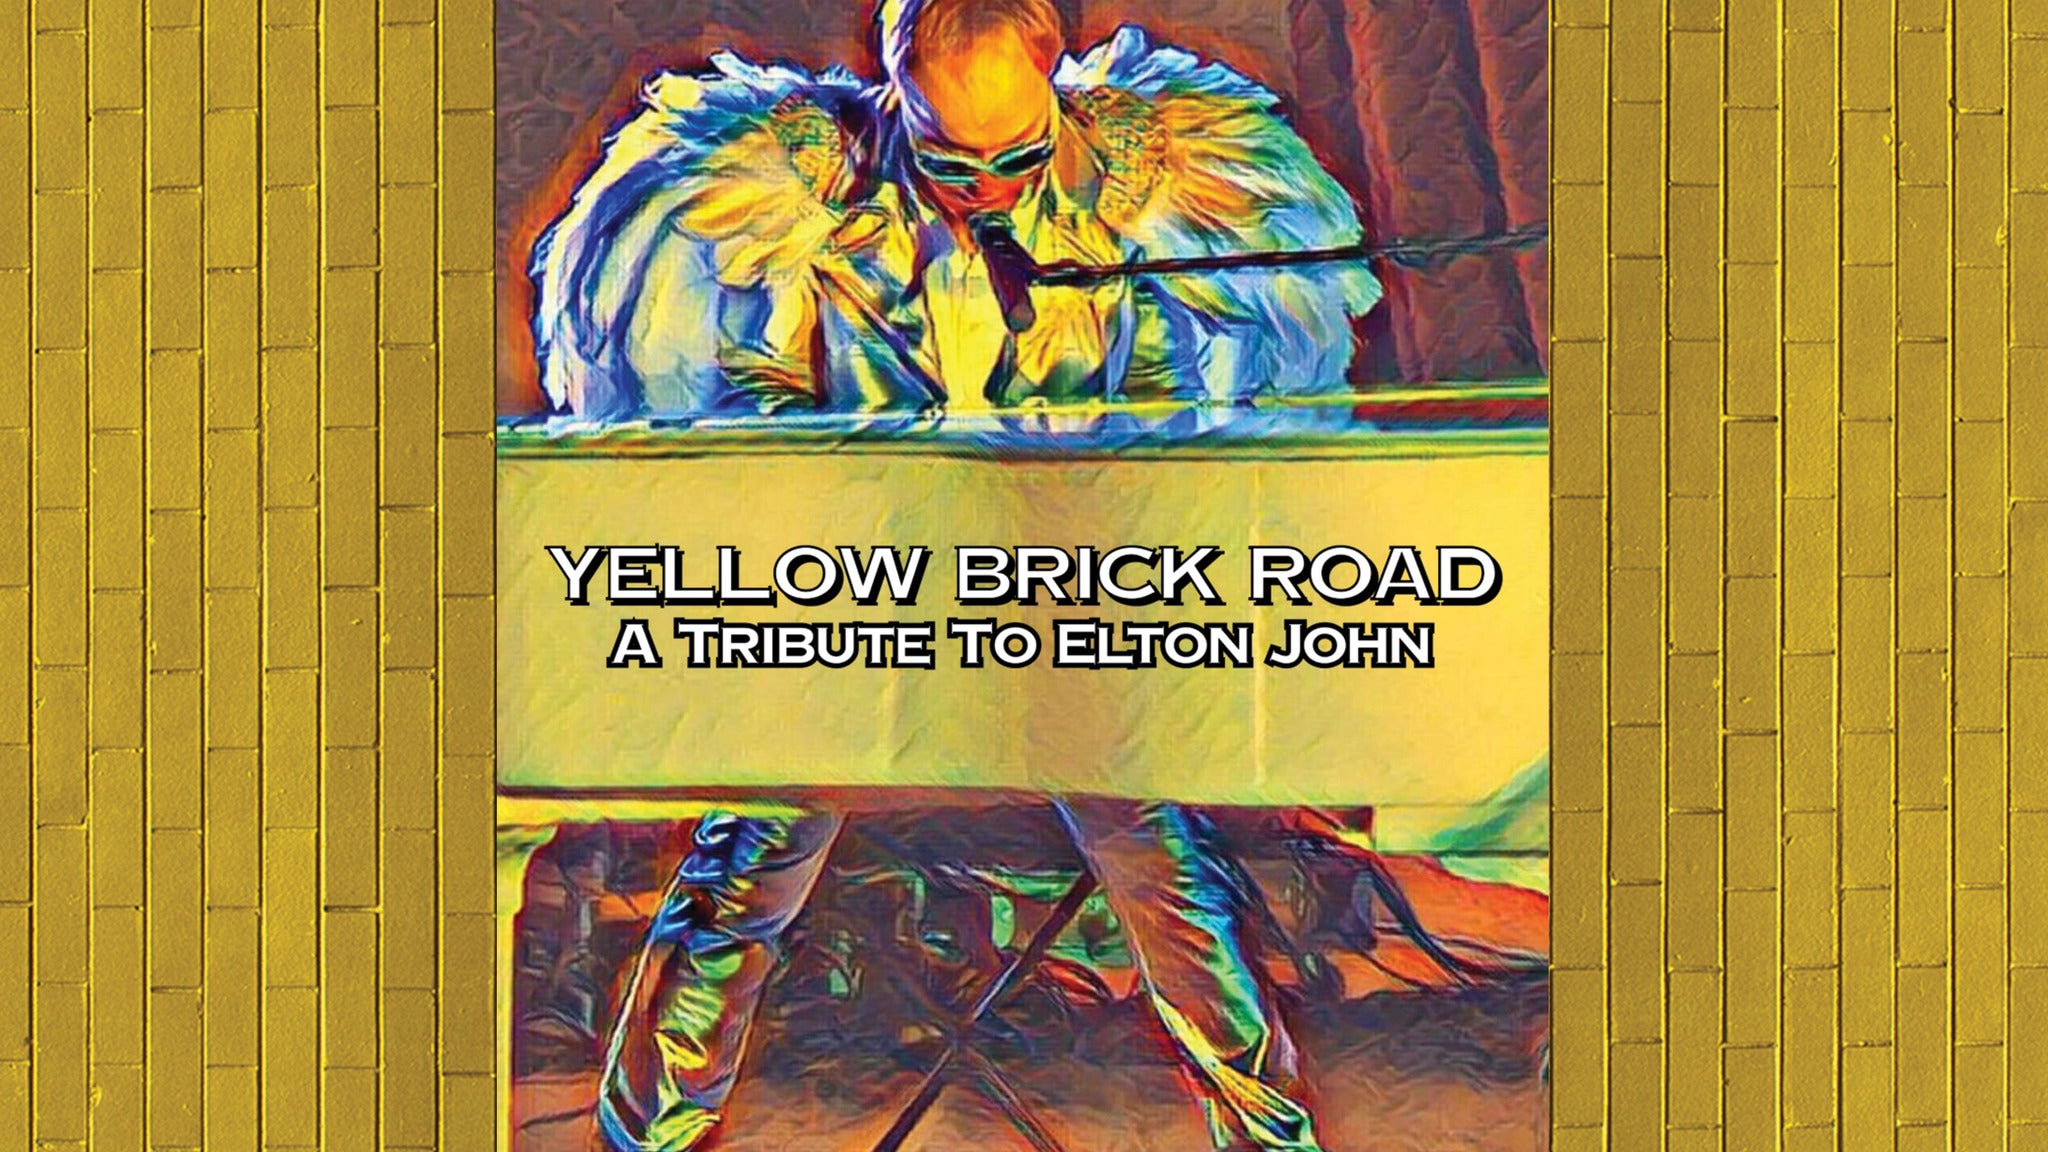 Yellow Brick Road, Elton John Tribute in Detroit promo photo for Holiday Gift Guide  presale offer code